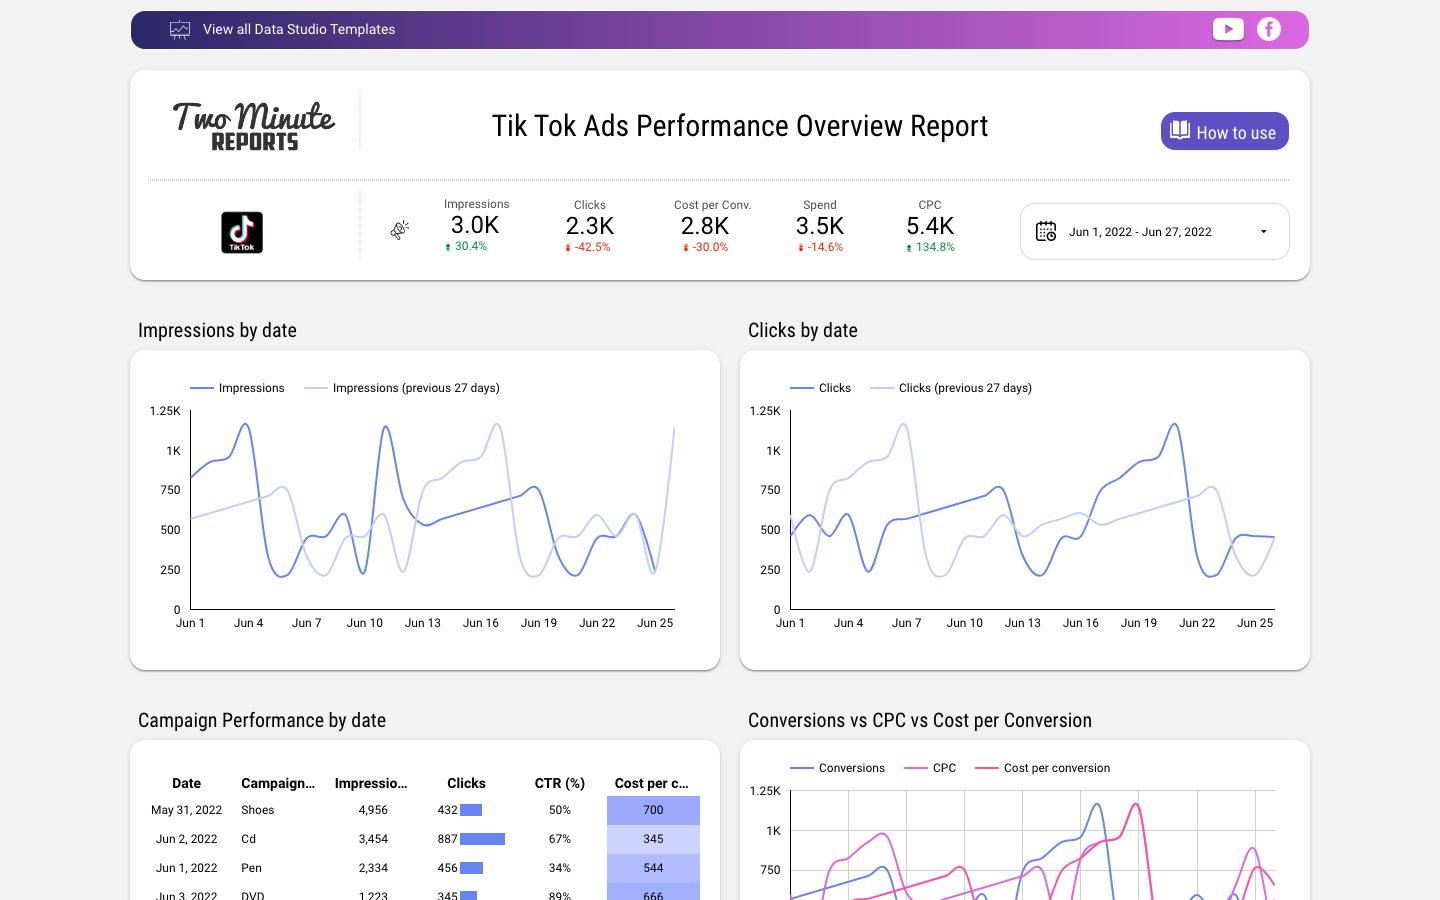 Tik Tok Ads Performance Overview Report